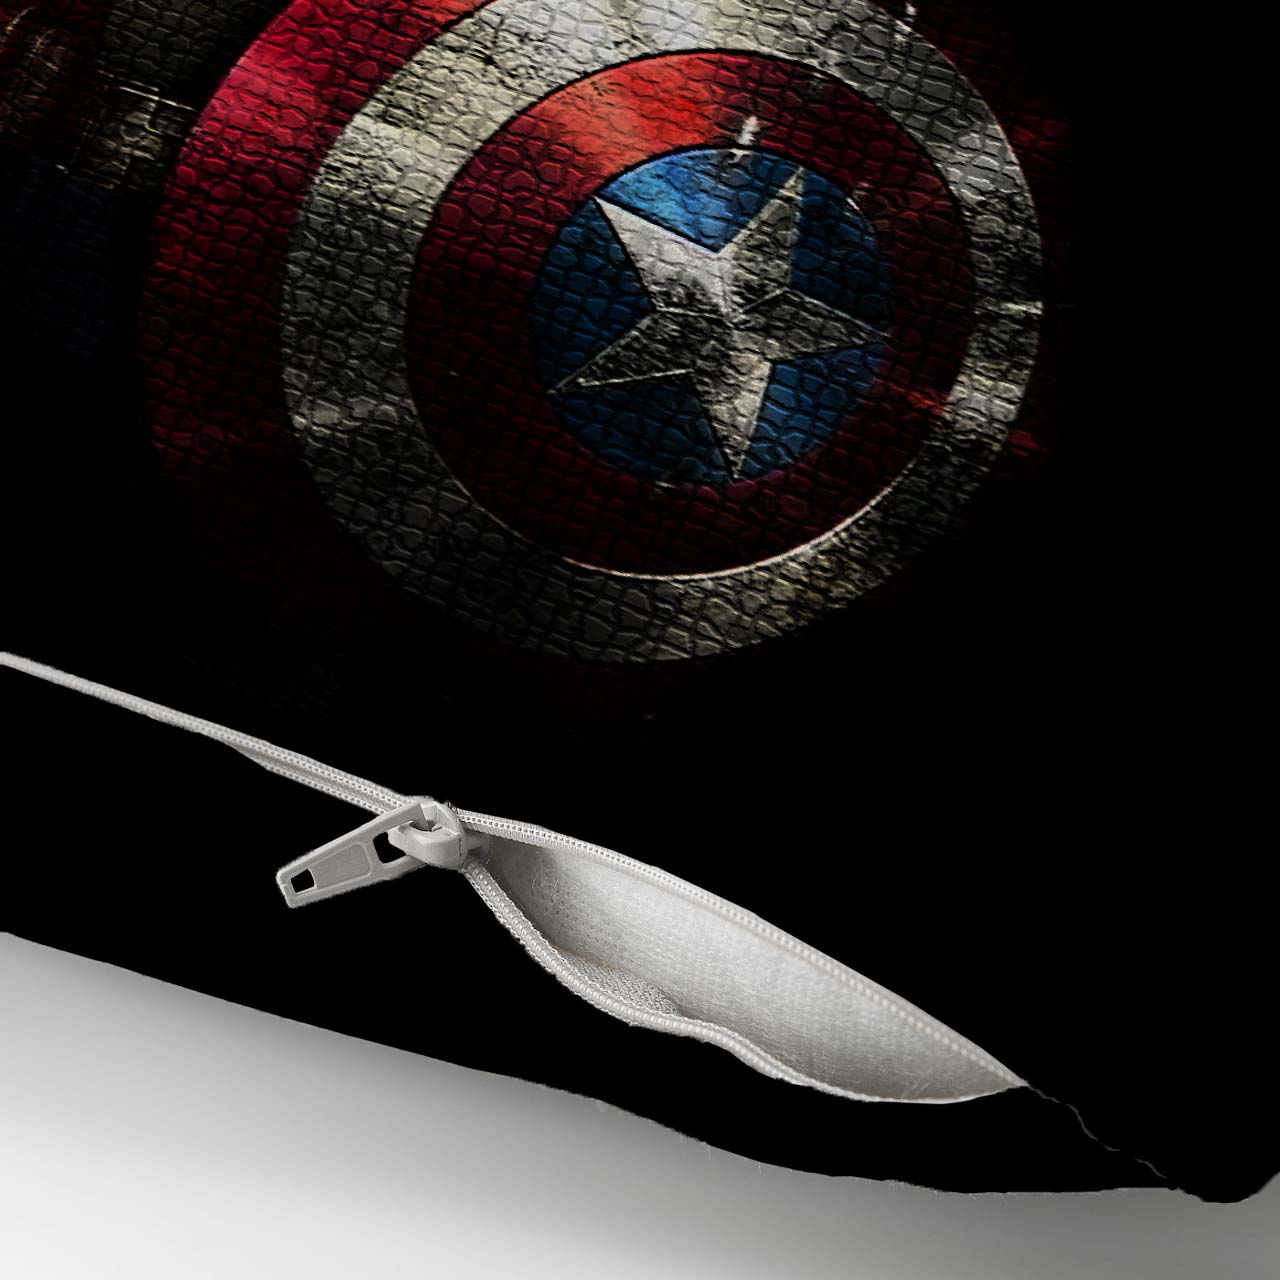 Captain America Super Soldier Cushion Cover trendy home